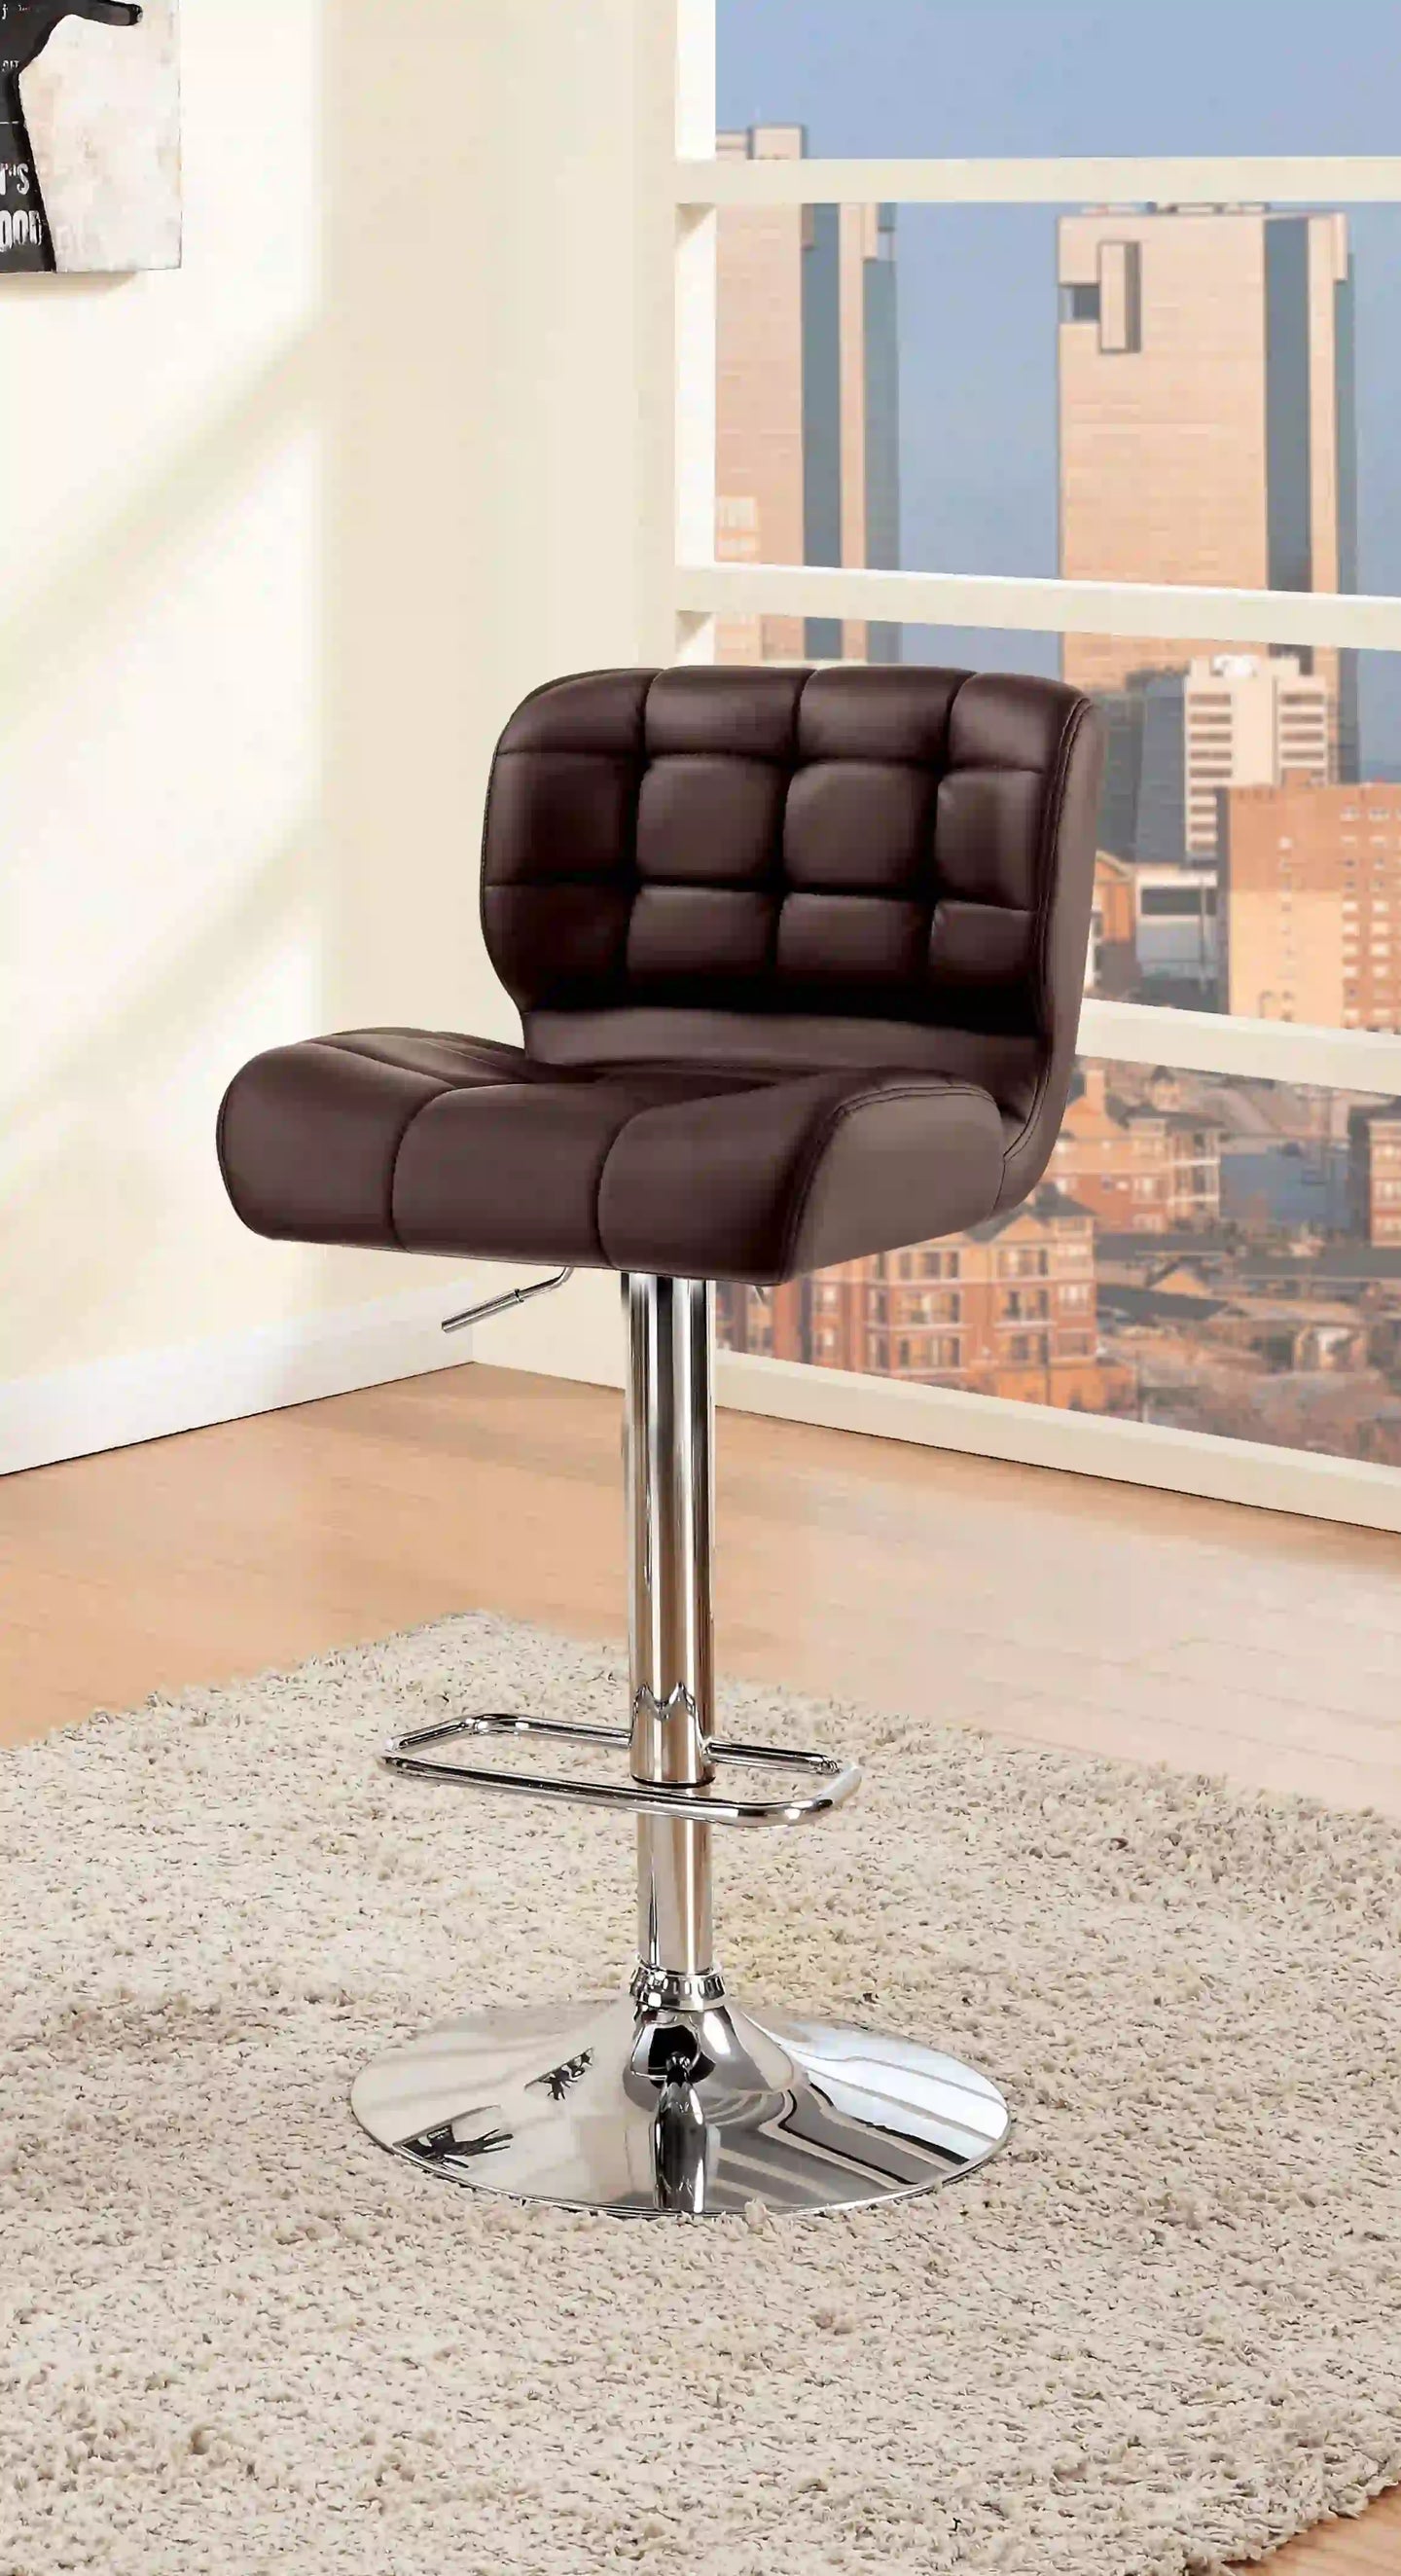 Furniture of America Hovey Contemporary Swivel Bar Stool in Brown - IDF-BR6152BR